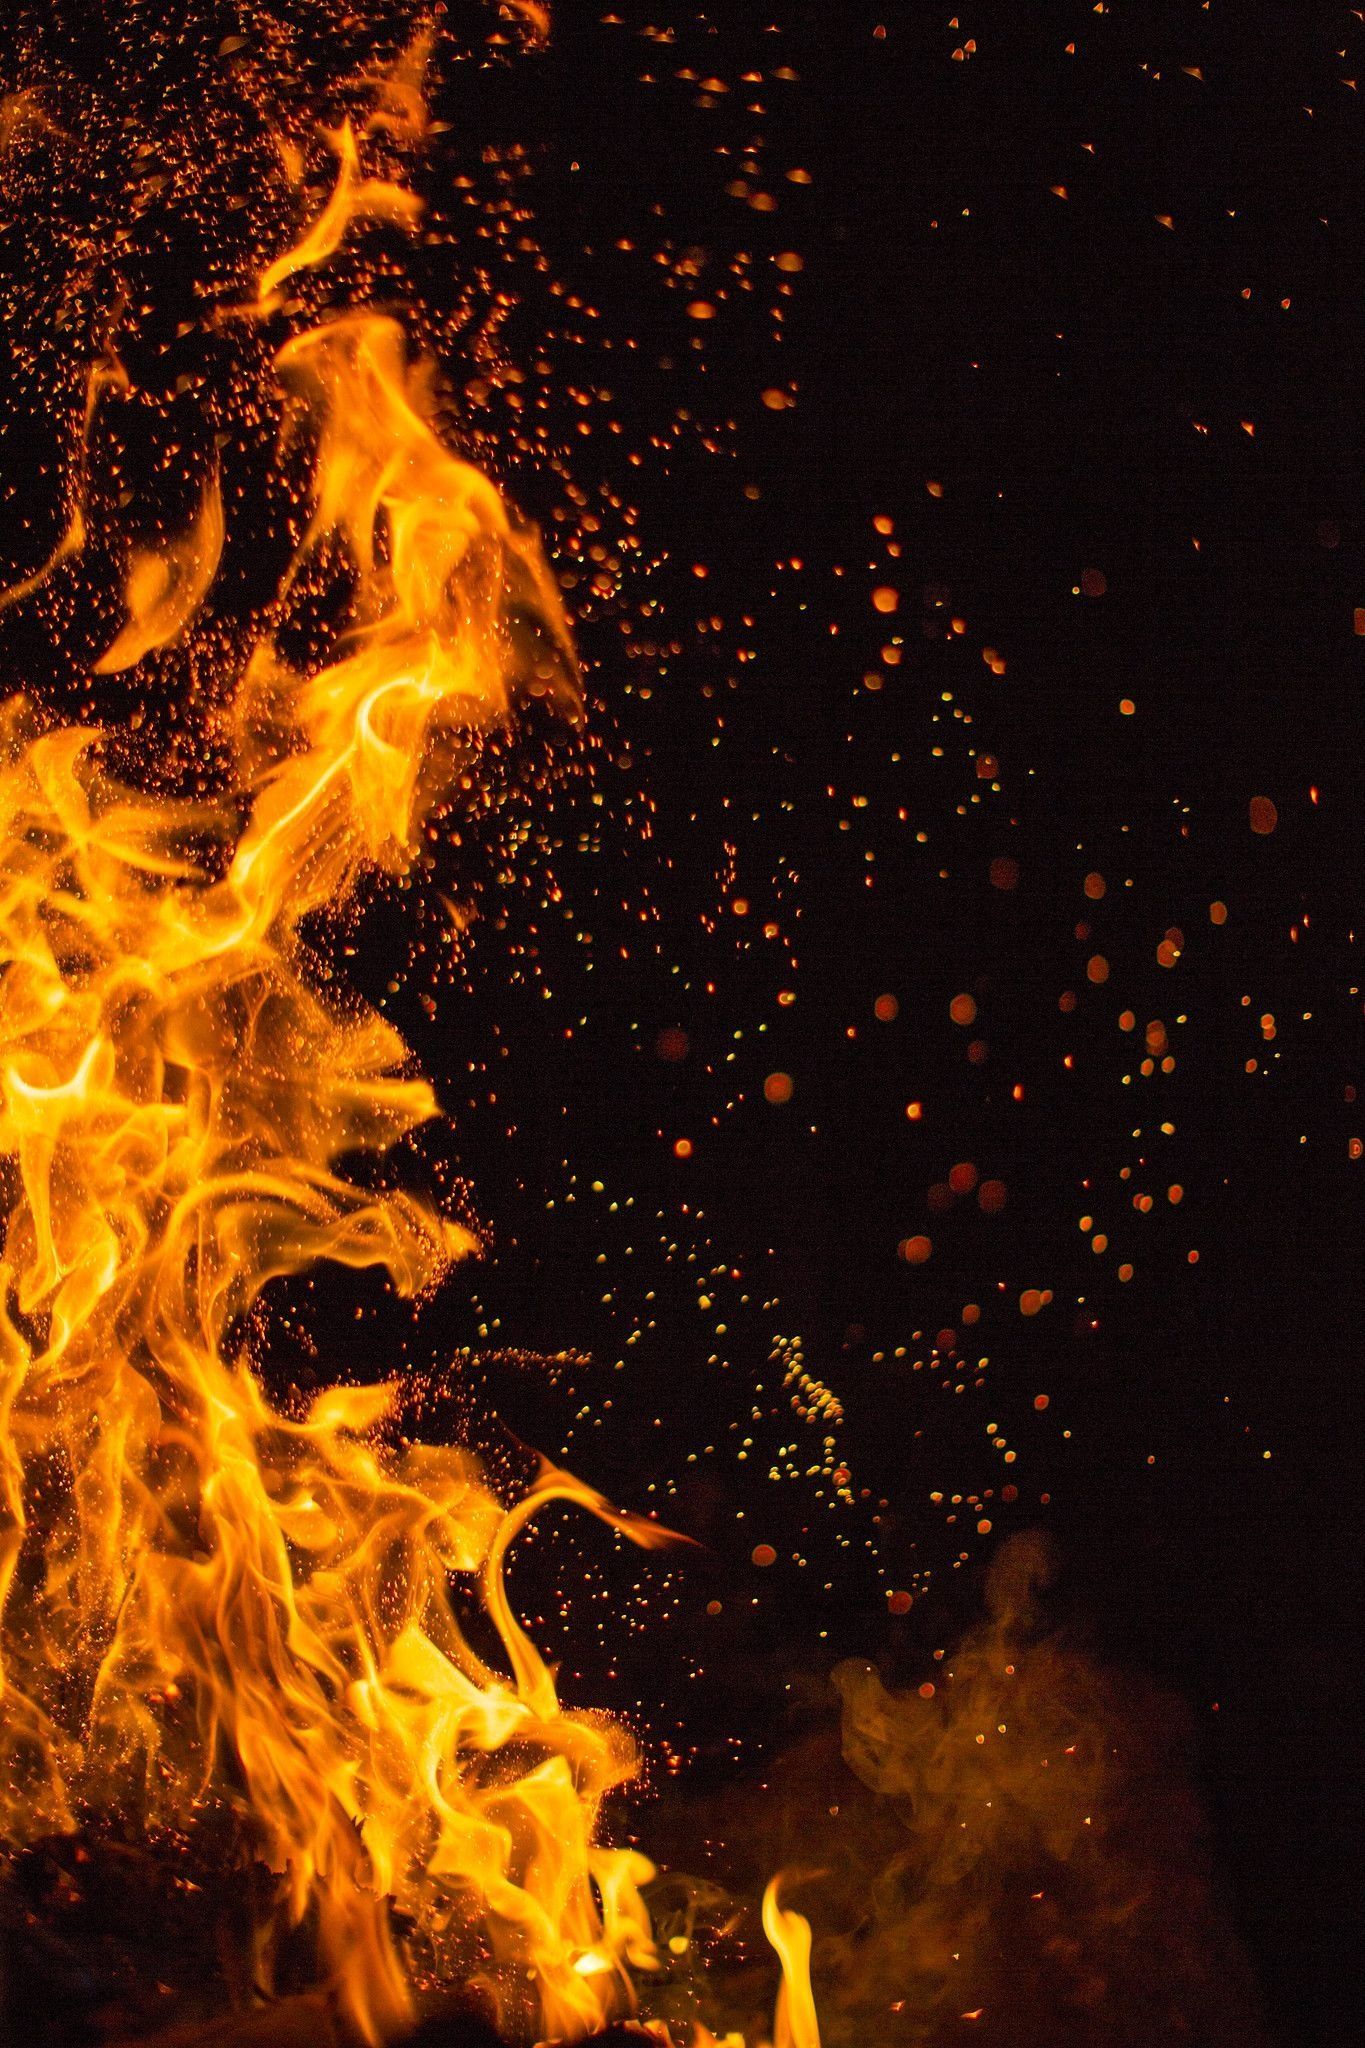 A close up of a fire with sparks flying - Fire, flames